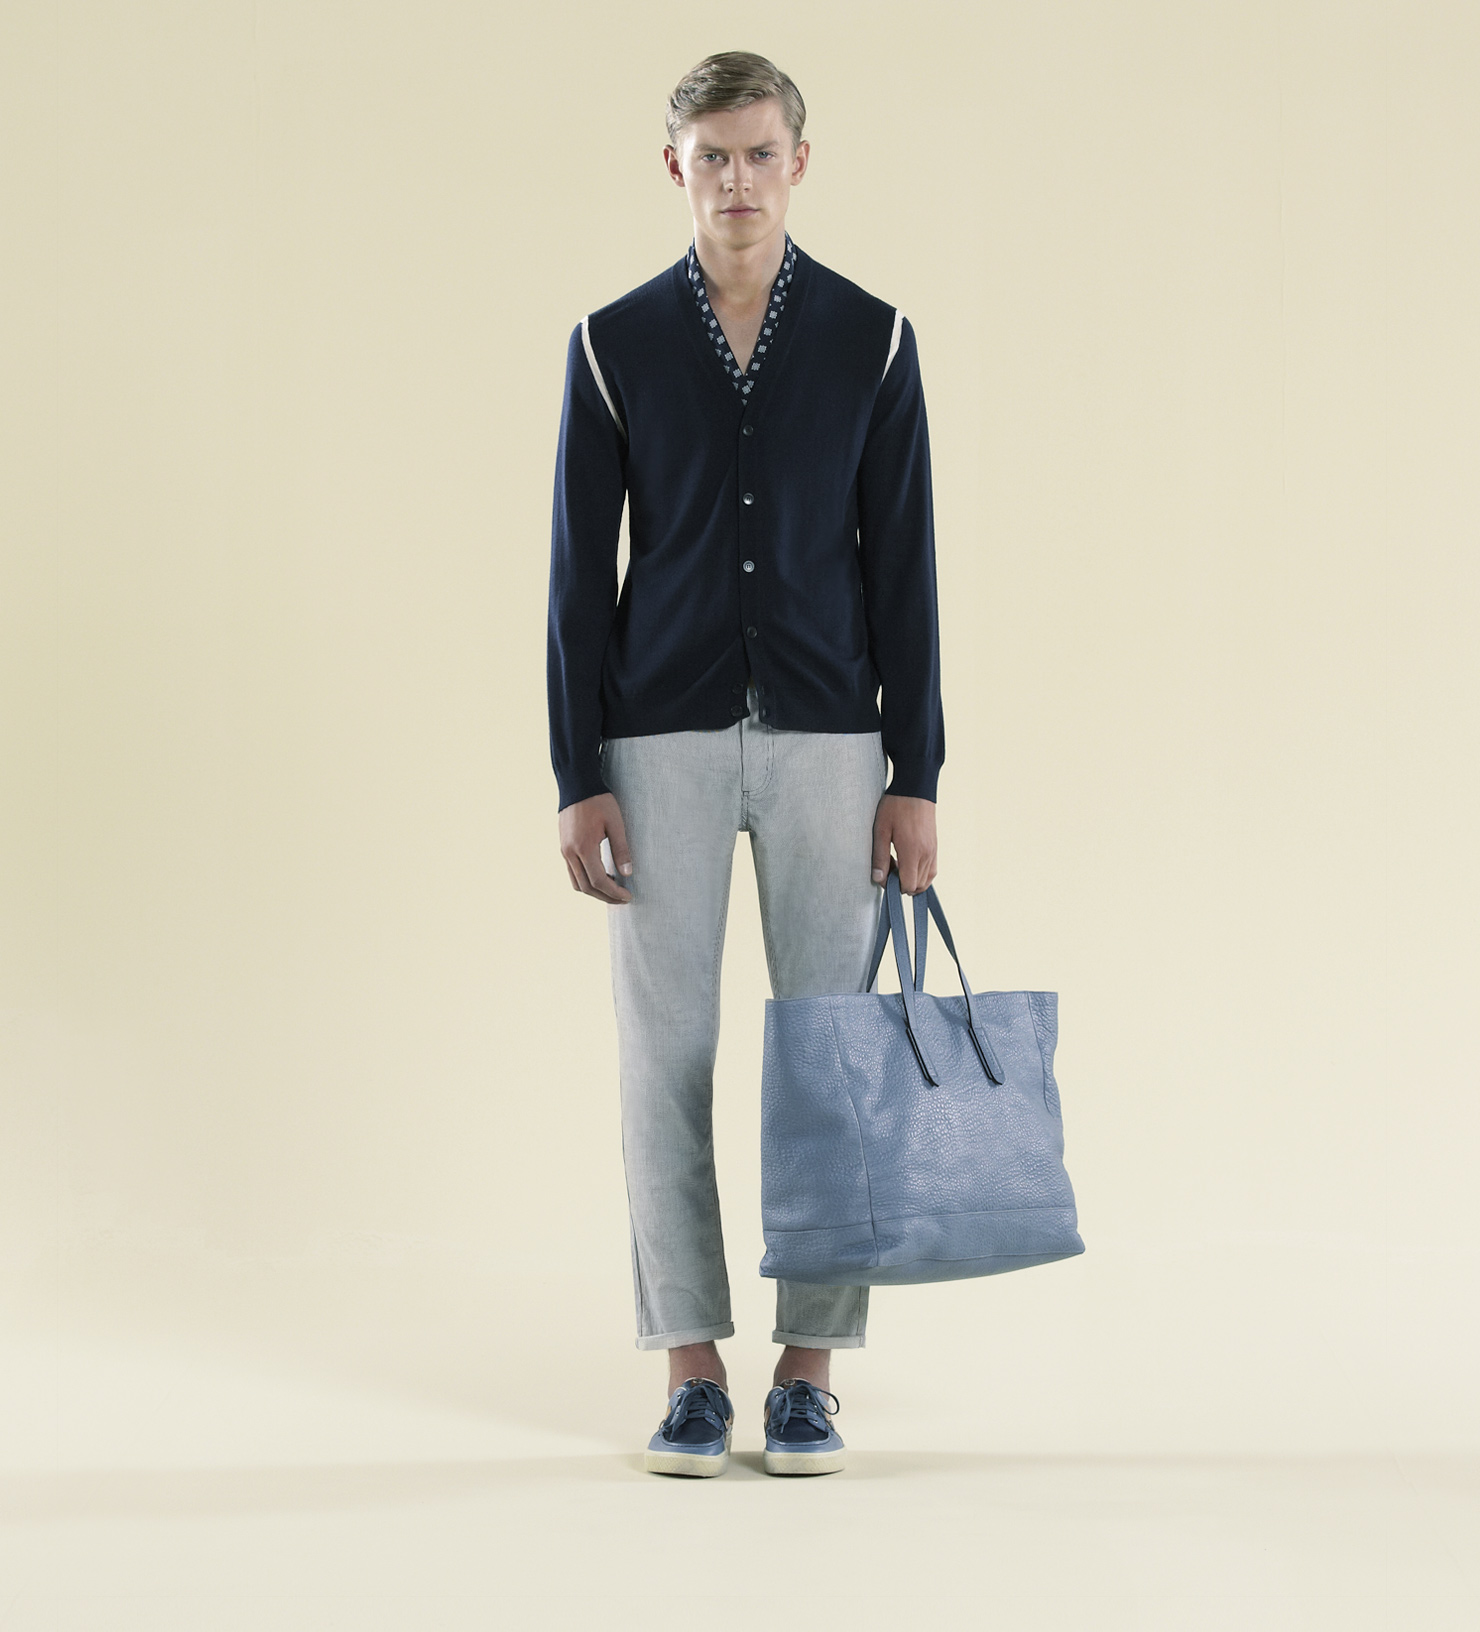 Gucci spring look book for men 2013